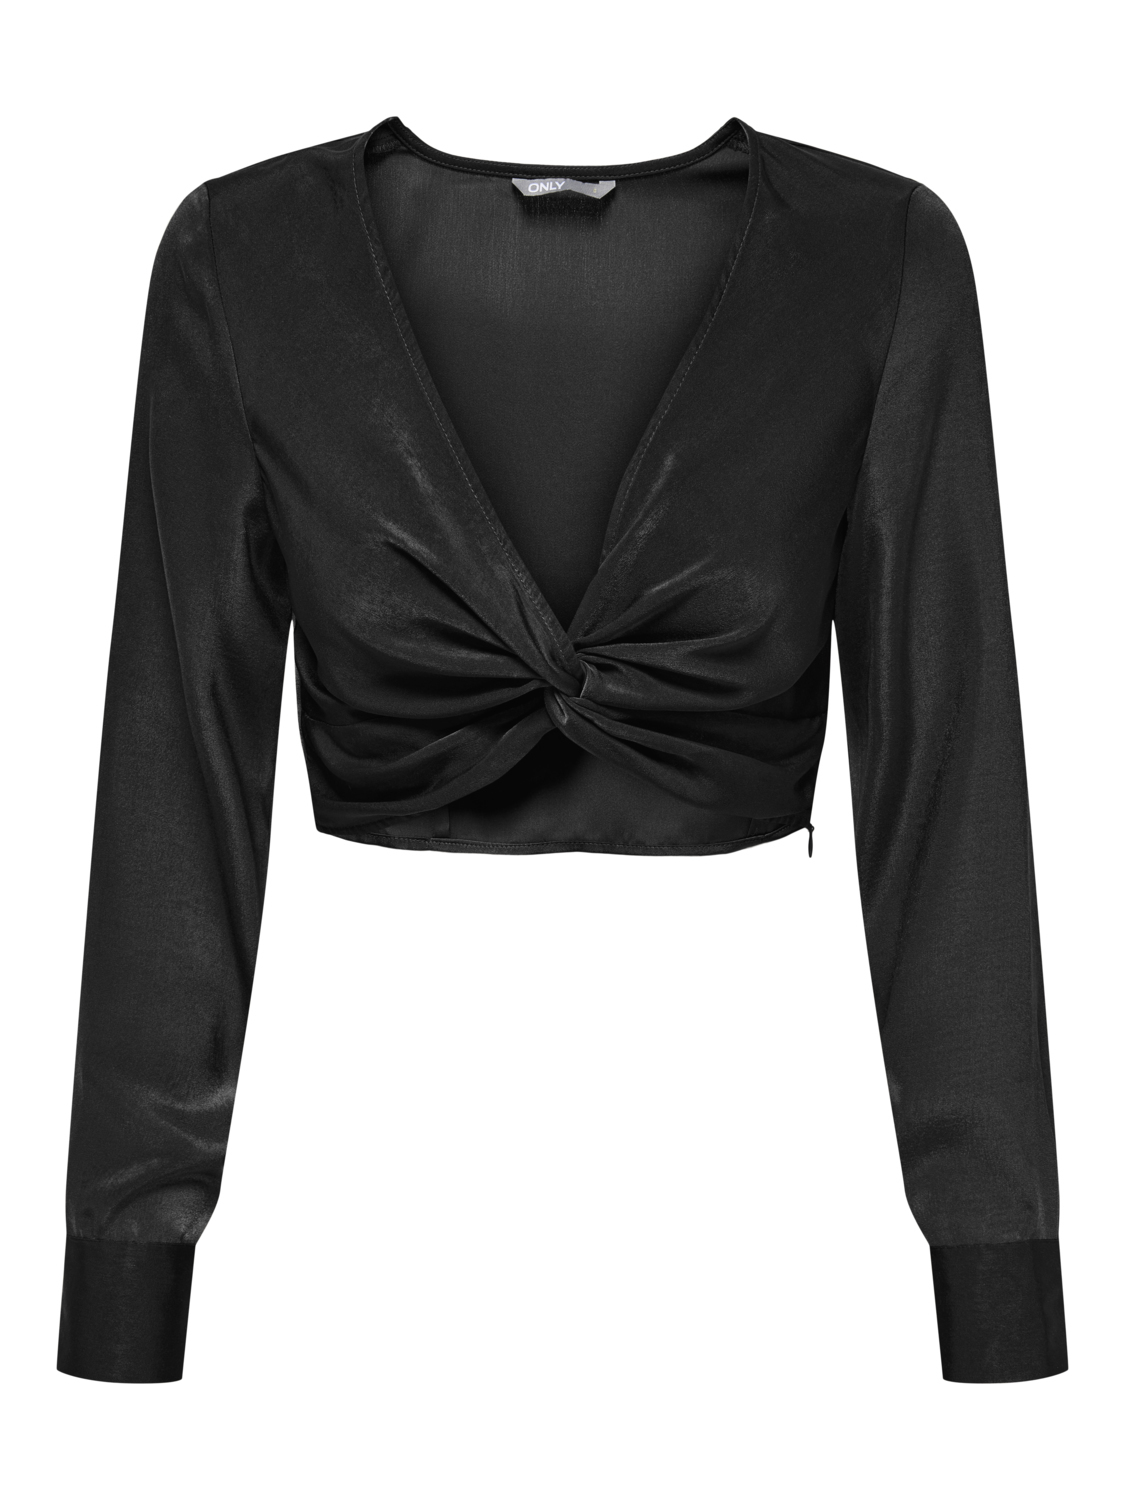 FINAL SALE - Mille satin knotted cropped top, BLACK, large